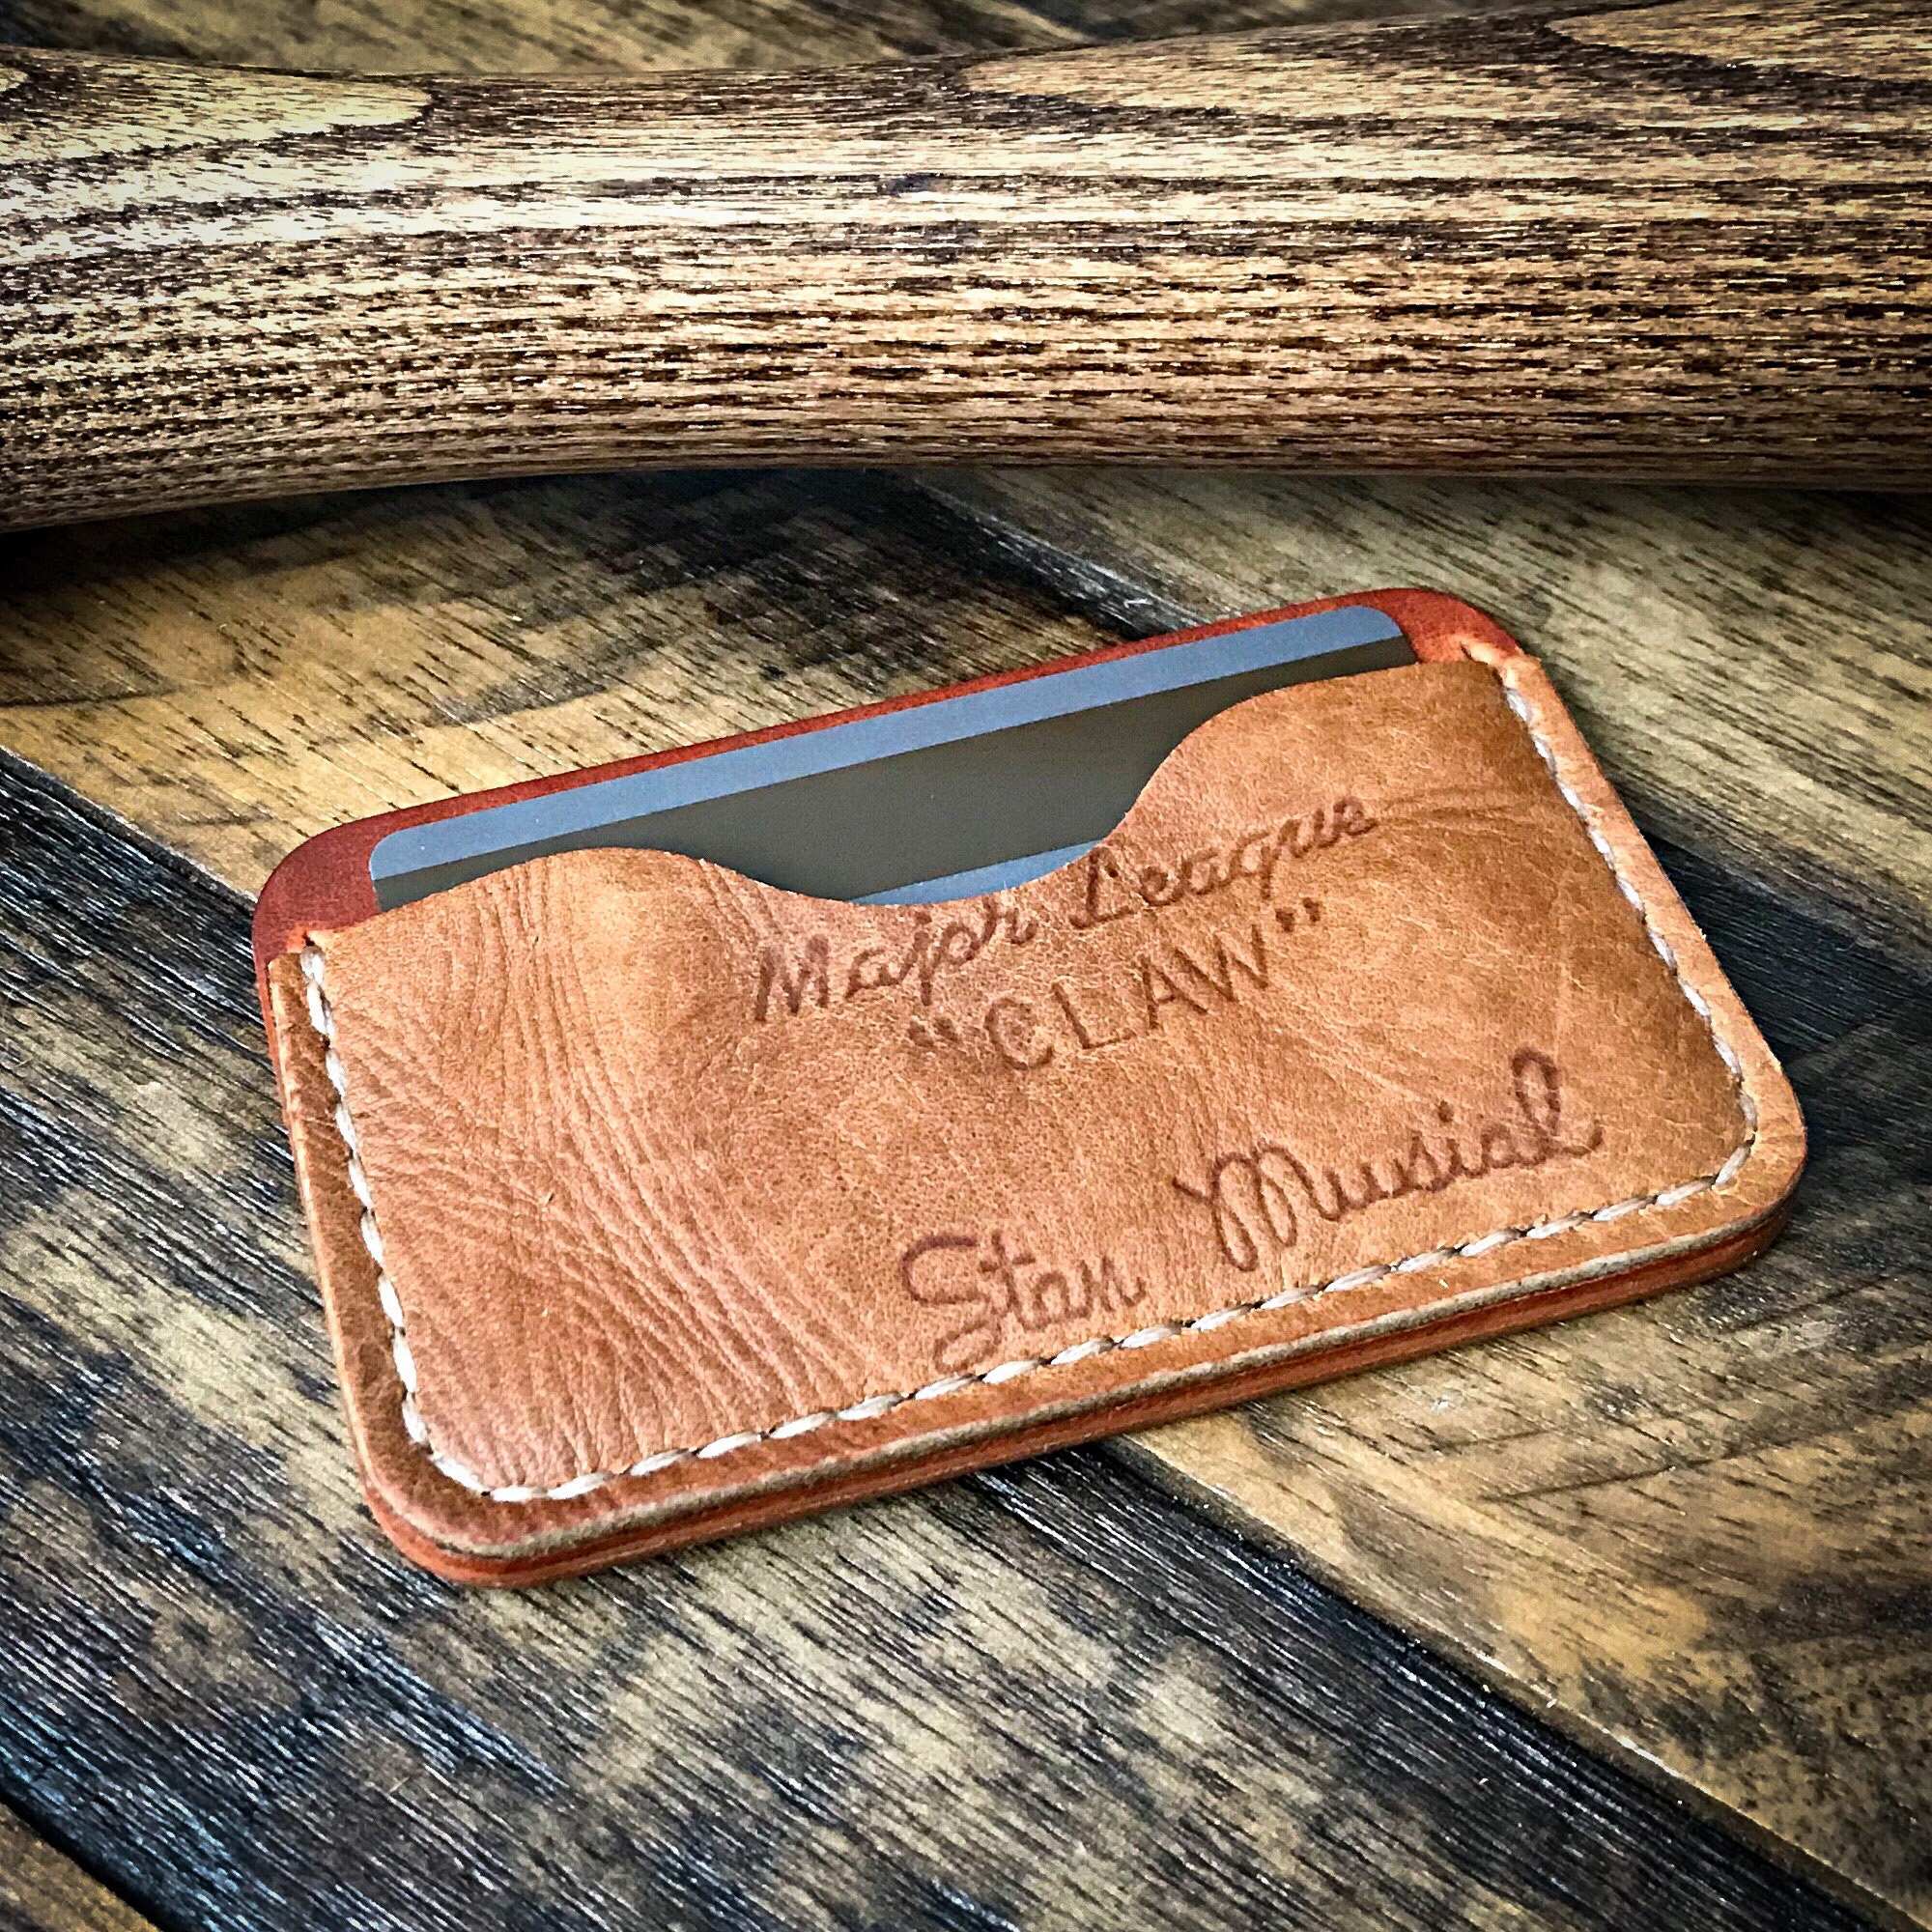 Stan Musial Baseball Glove Leather Wallet, Minimalist Leather Wallet, Horween Leather, St. Louis Cardinals